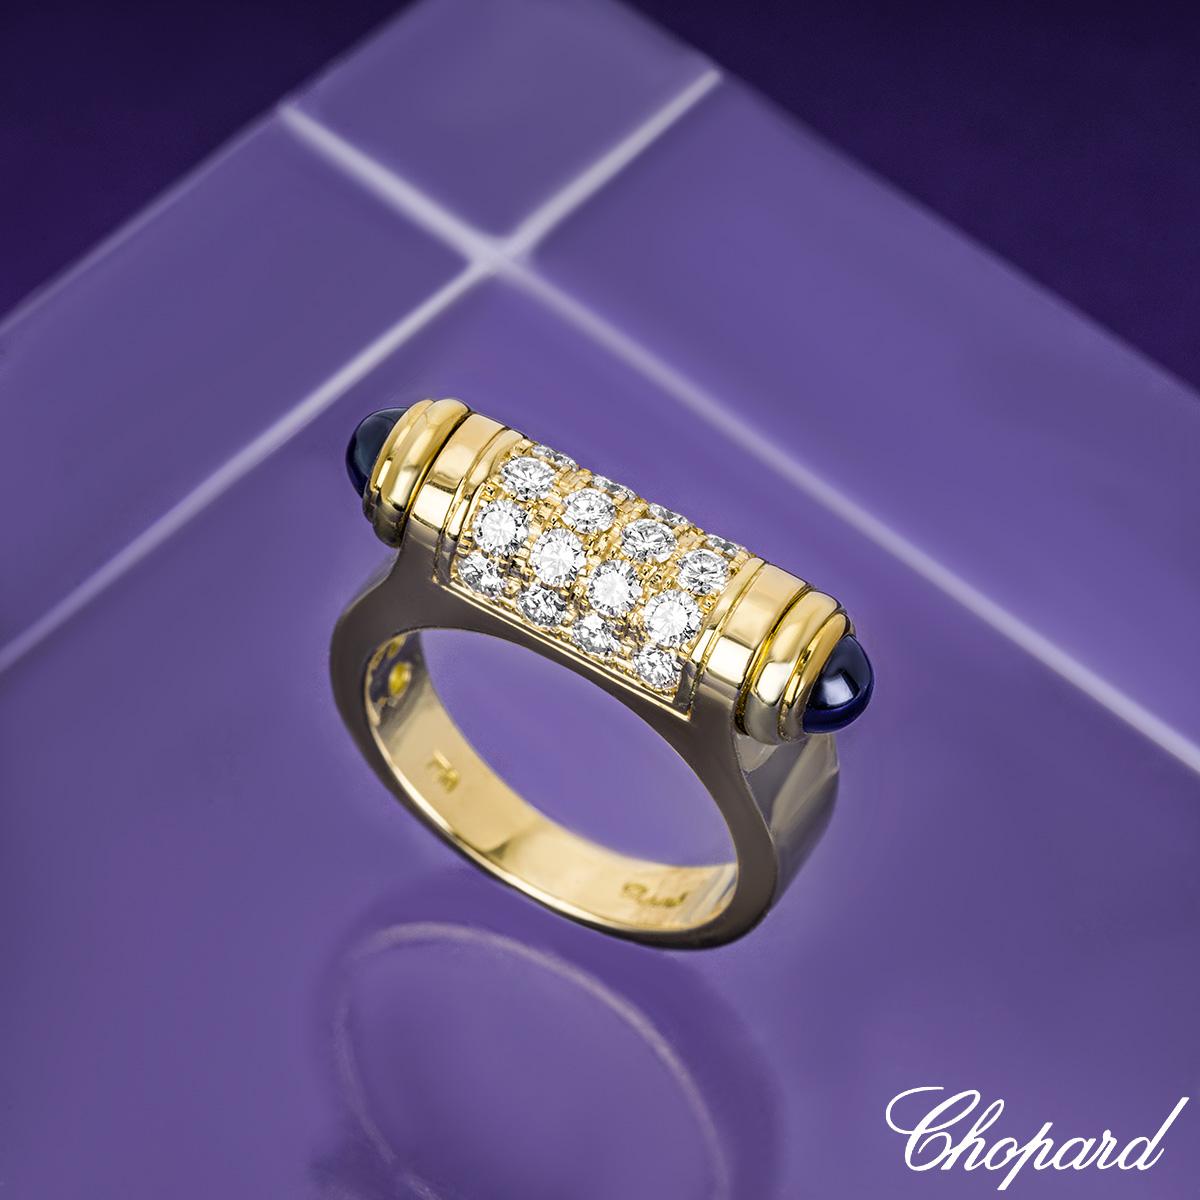 Chopard Limted Edition Diamond Set Imperiale Ring 823255-0111 For Sale 1